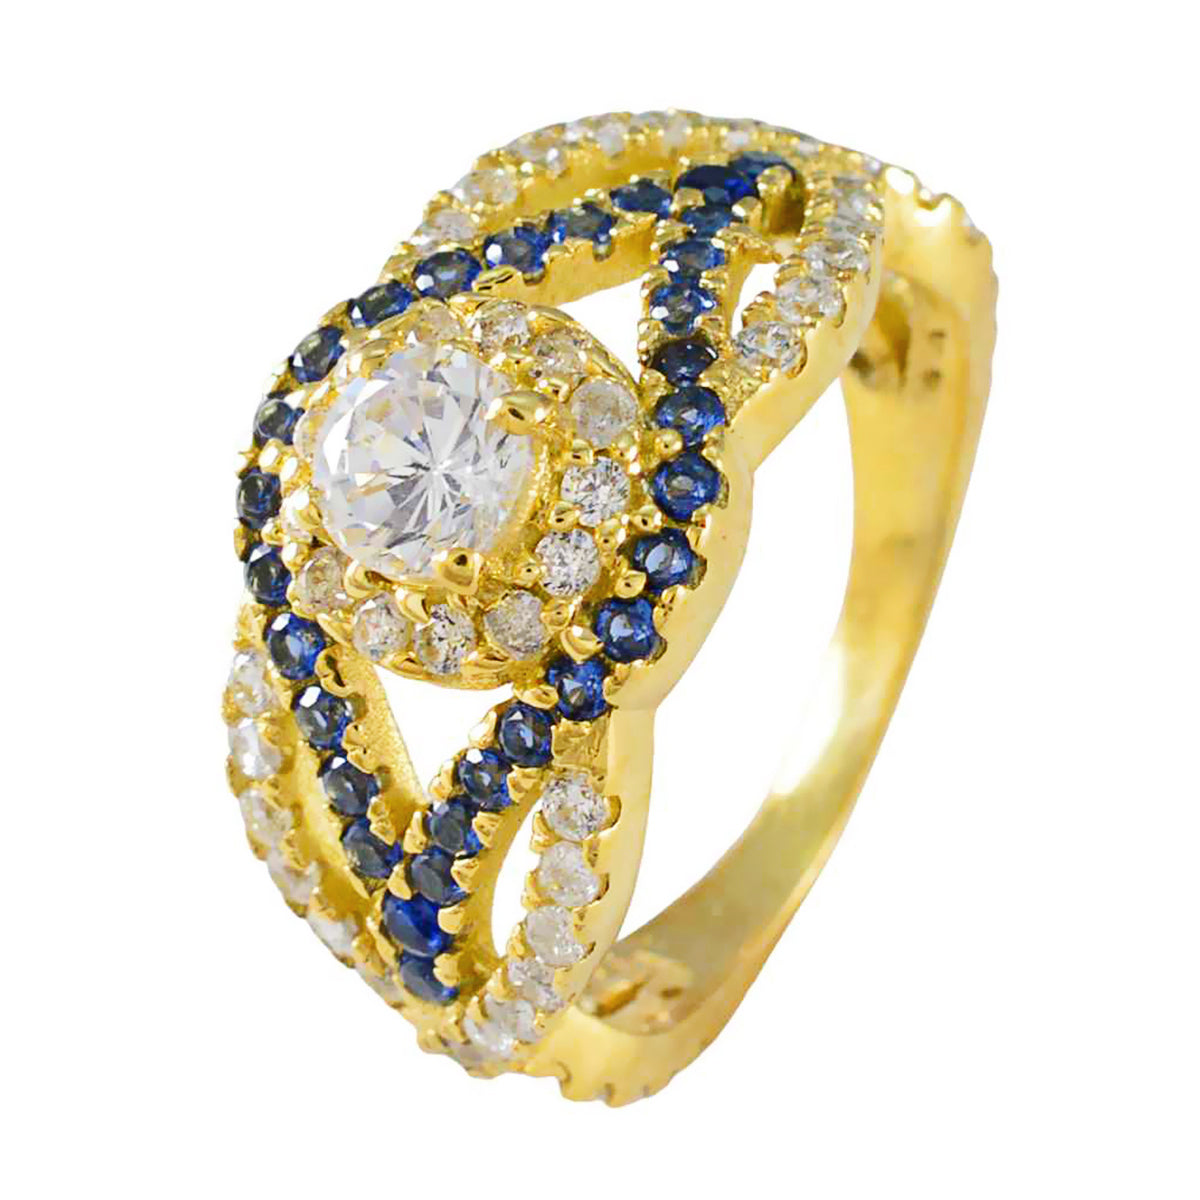 Riyo Jewelry Silver Ring With Yellow Gold Plating Blue Sapphire CZ Stone Round Shape Prong Setting Designer Jewelry New Year Ring